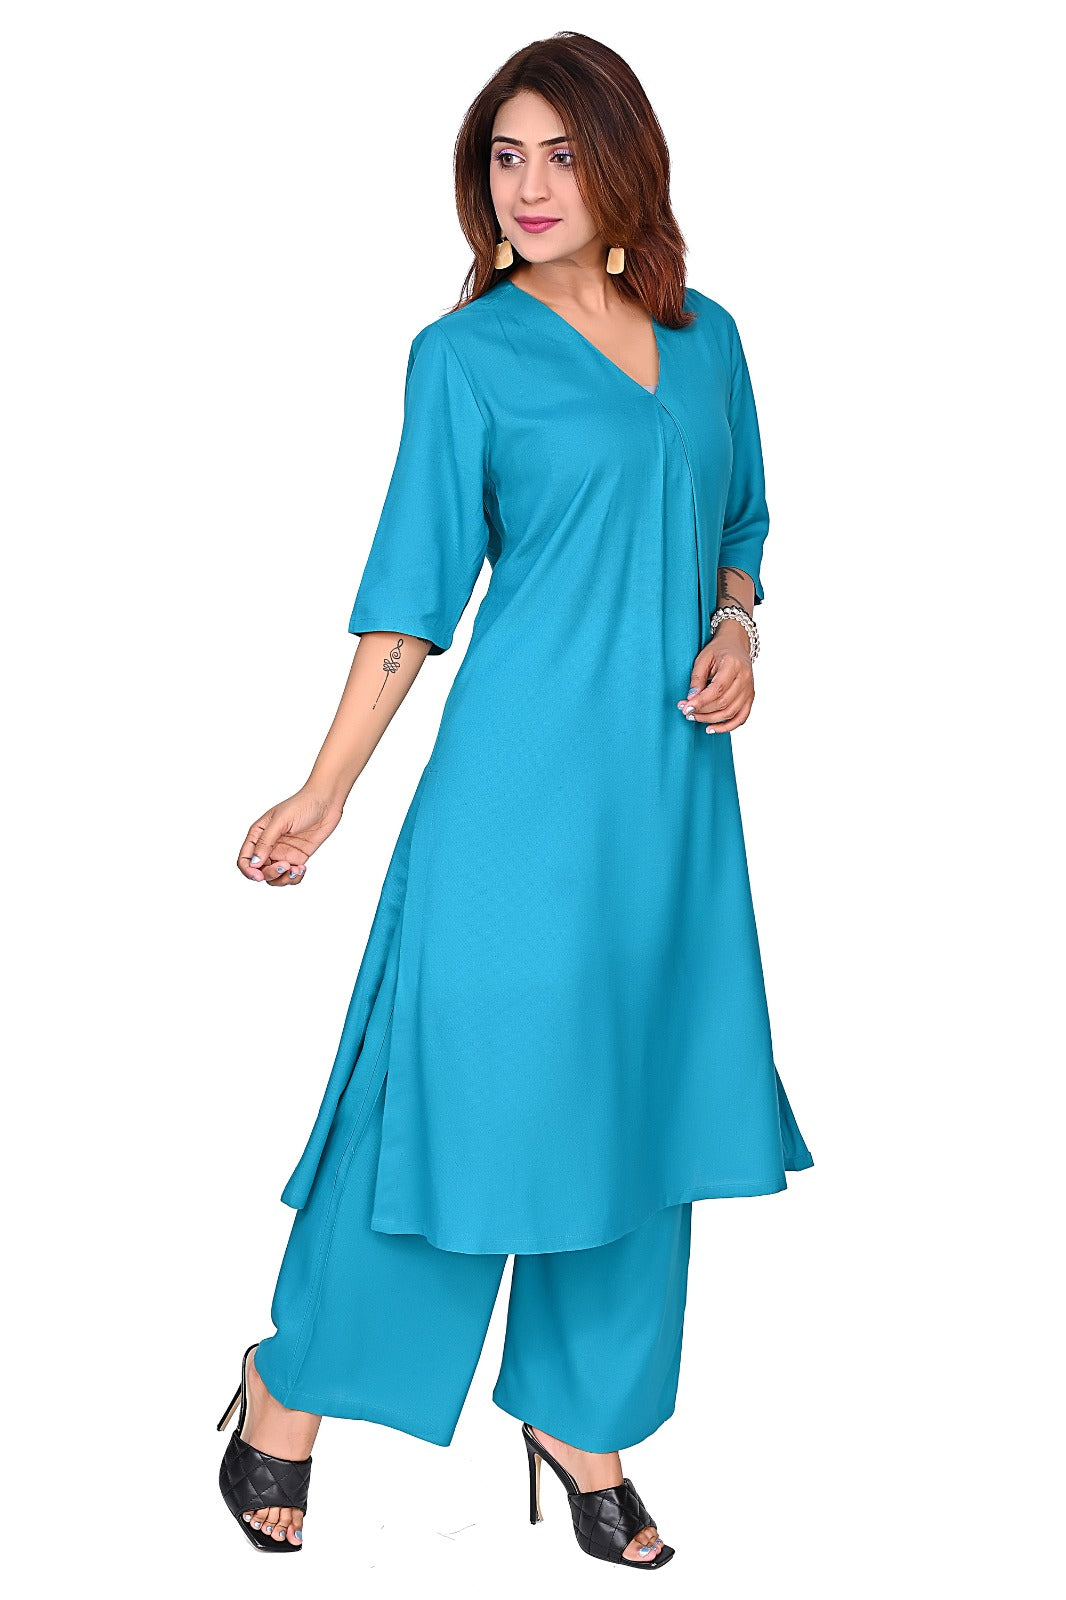 Nirmal online Rayon Premium quality fabric co-ord set kurti for Women in Teal blue colour